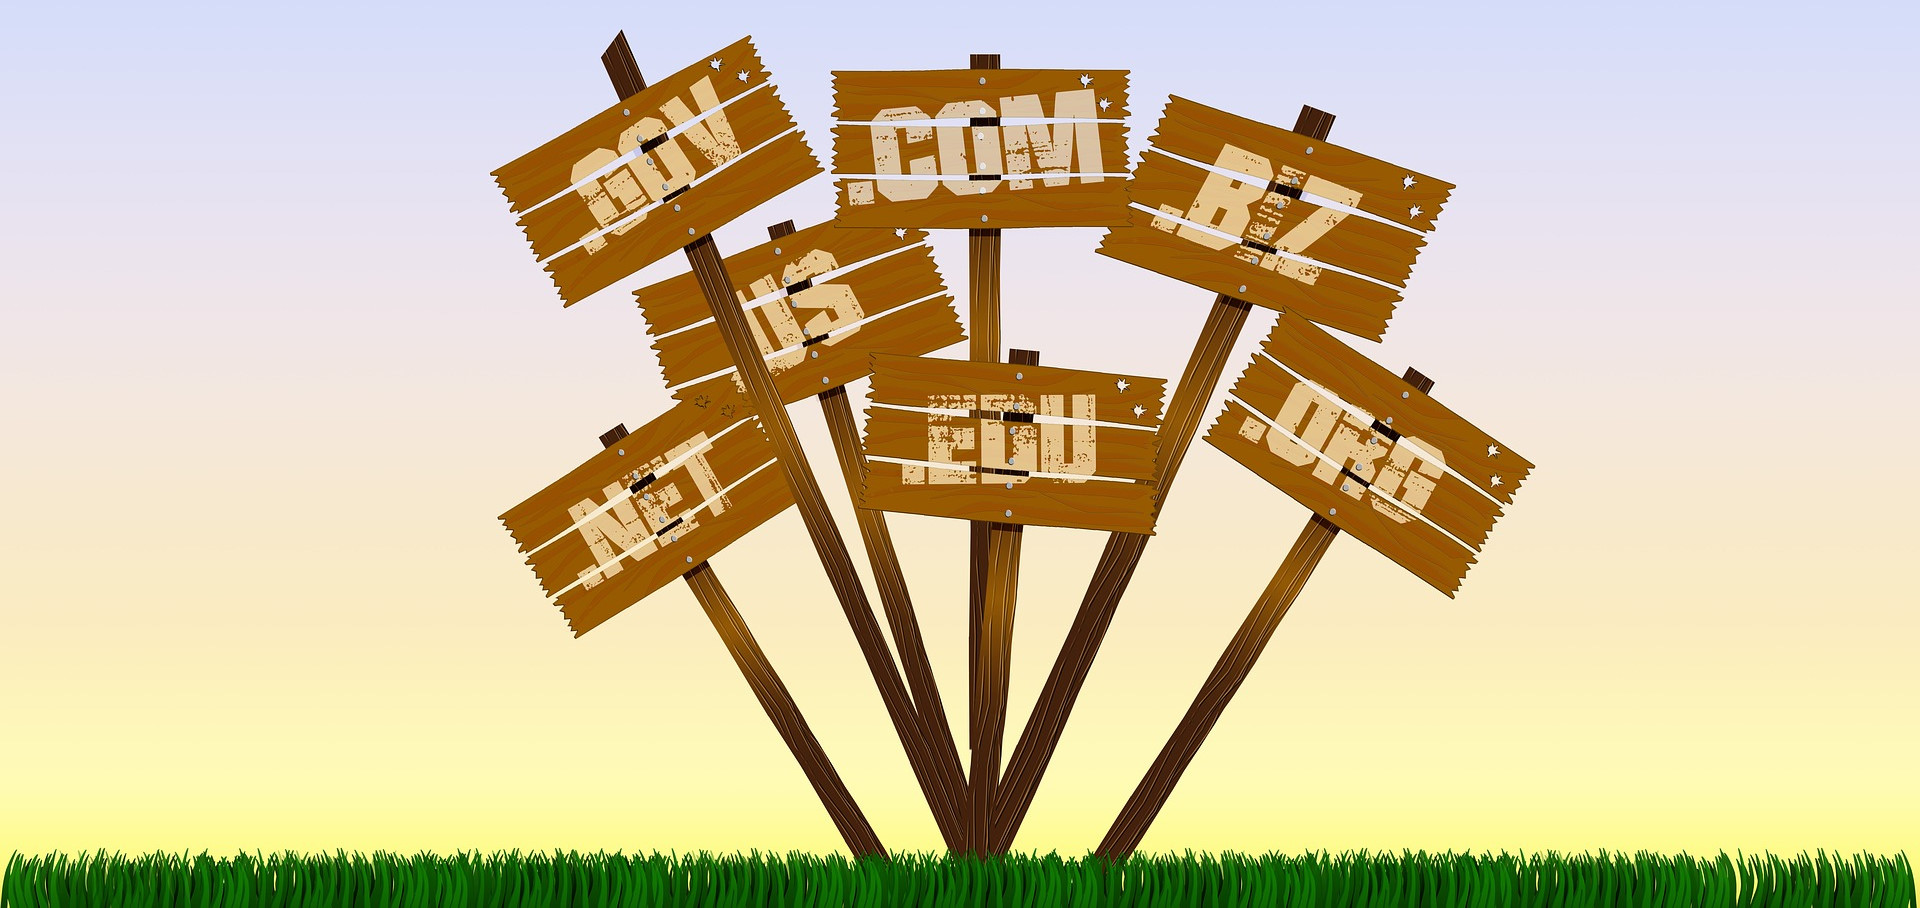 Top level web domains on wooden signs